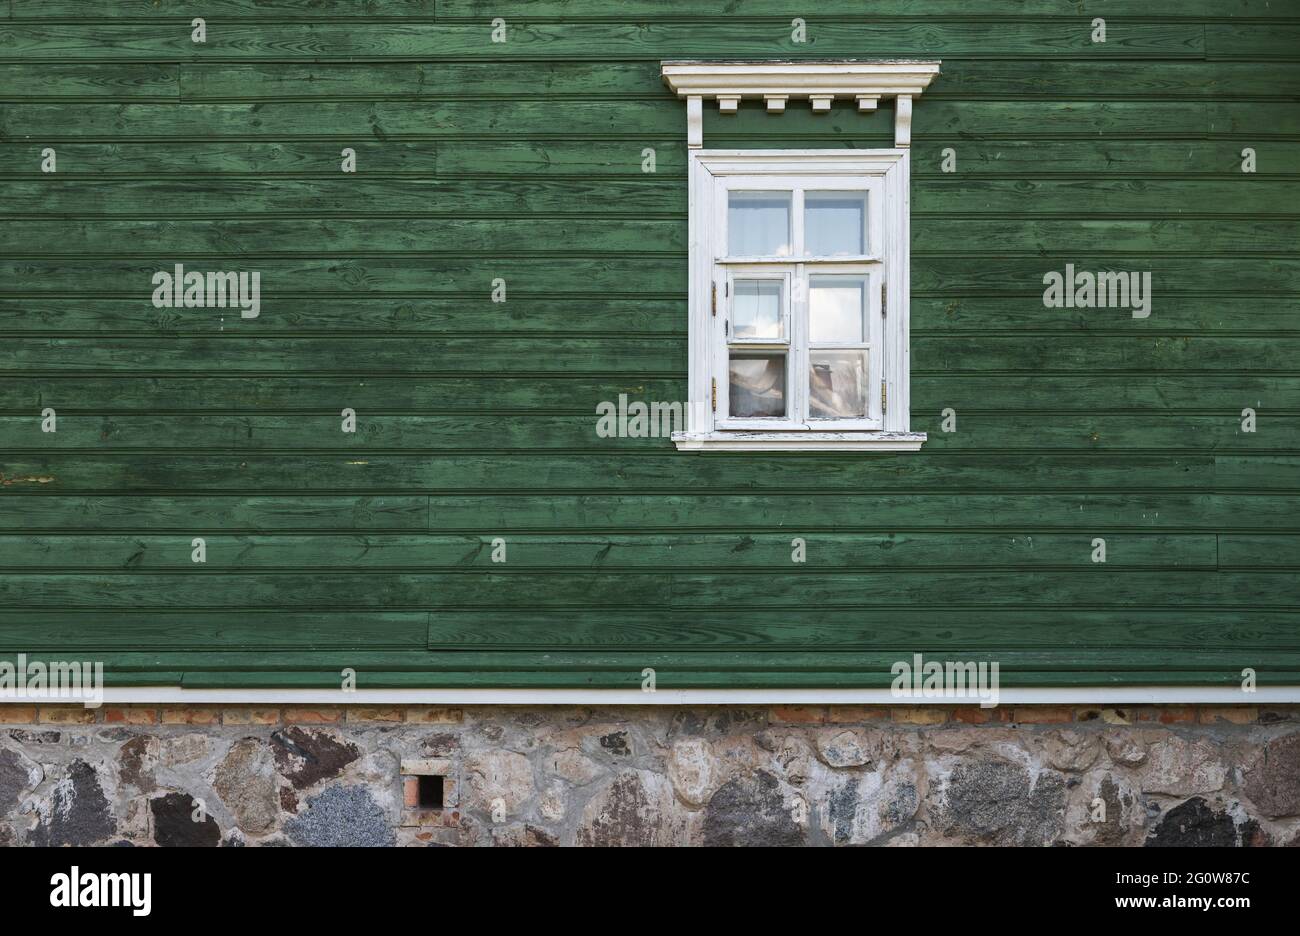 Window with white decorative frame in an old green wooden wall, architectural background texture Stock Photo